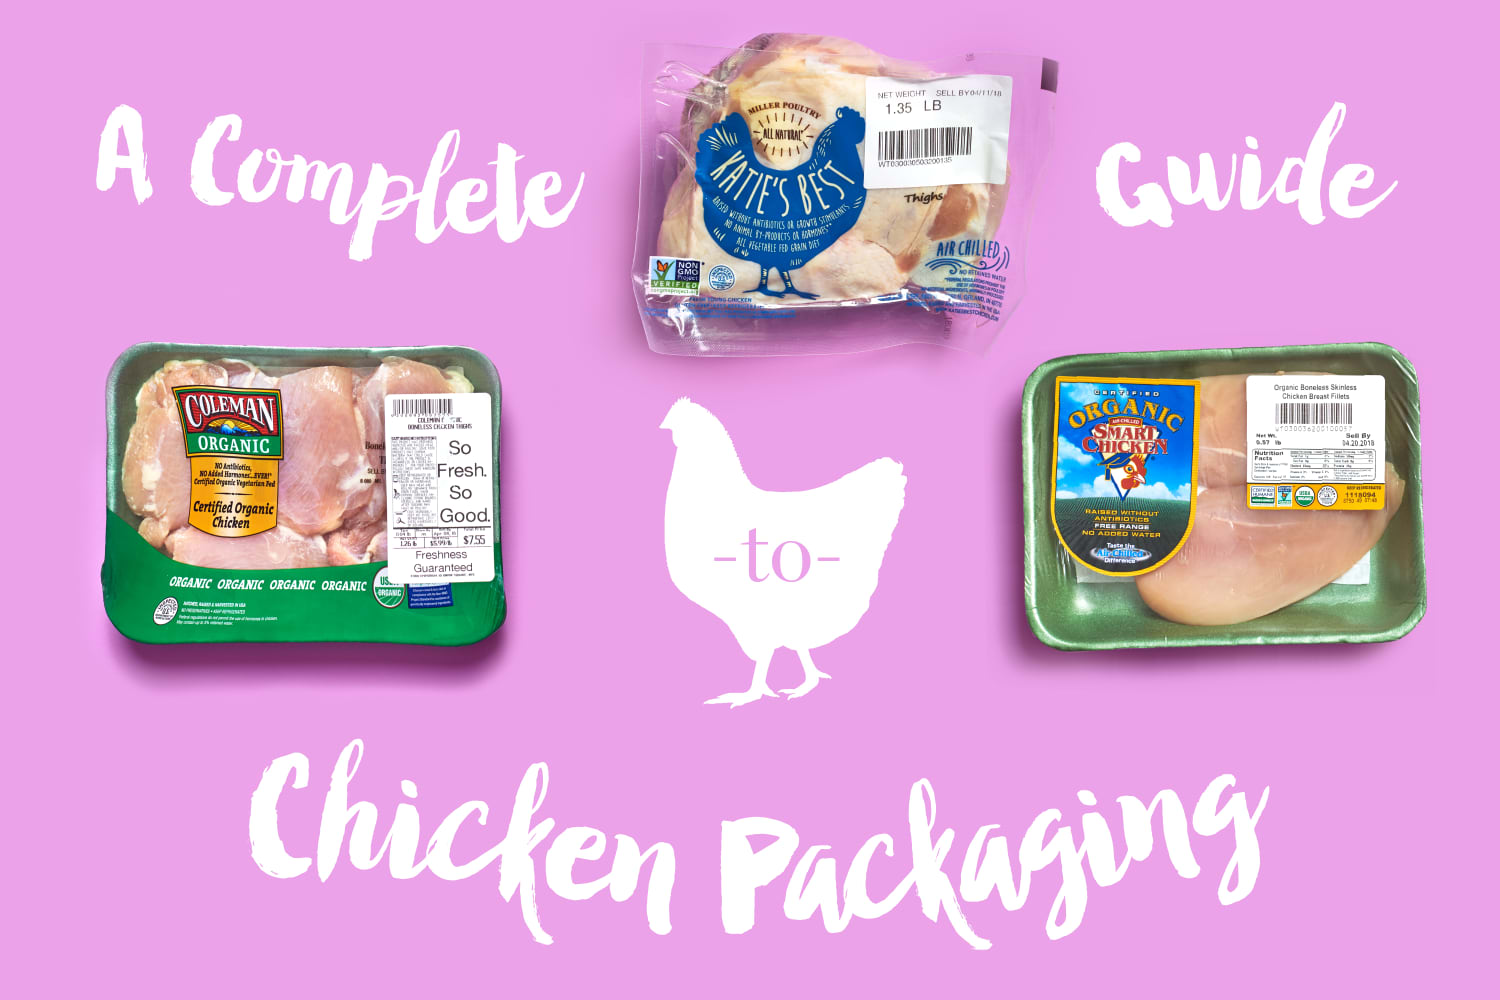 G.A.P.'s Better Chicken Project Label Now Available at Whole Foods Market